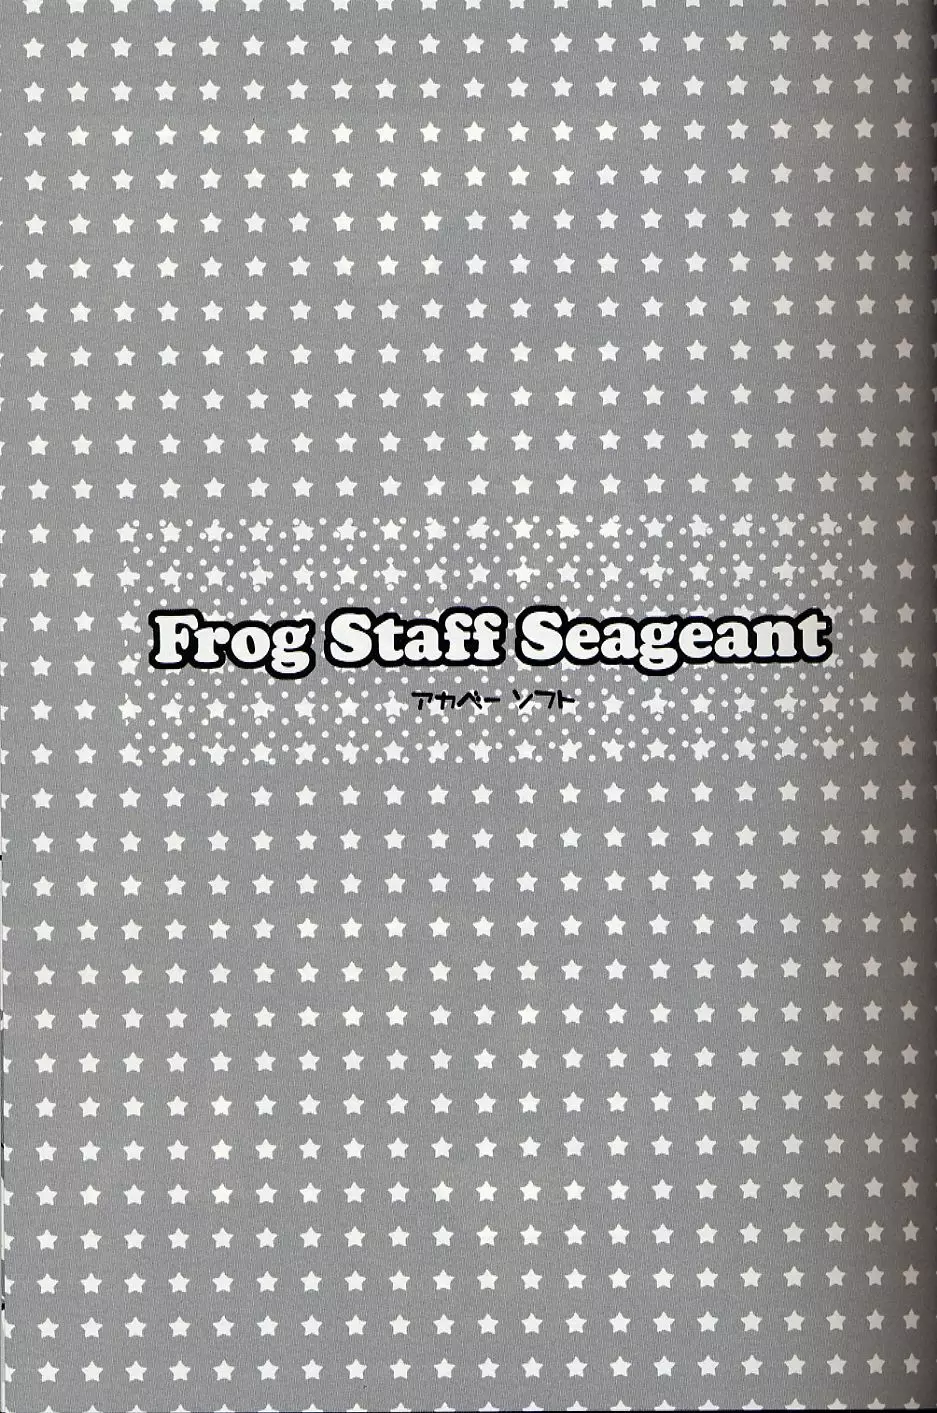 Frog Staff Seageant - page2